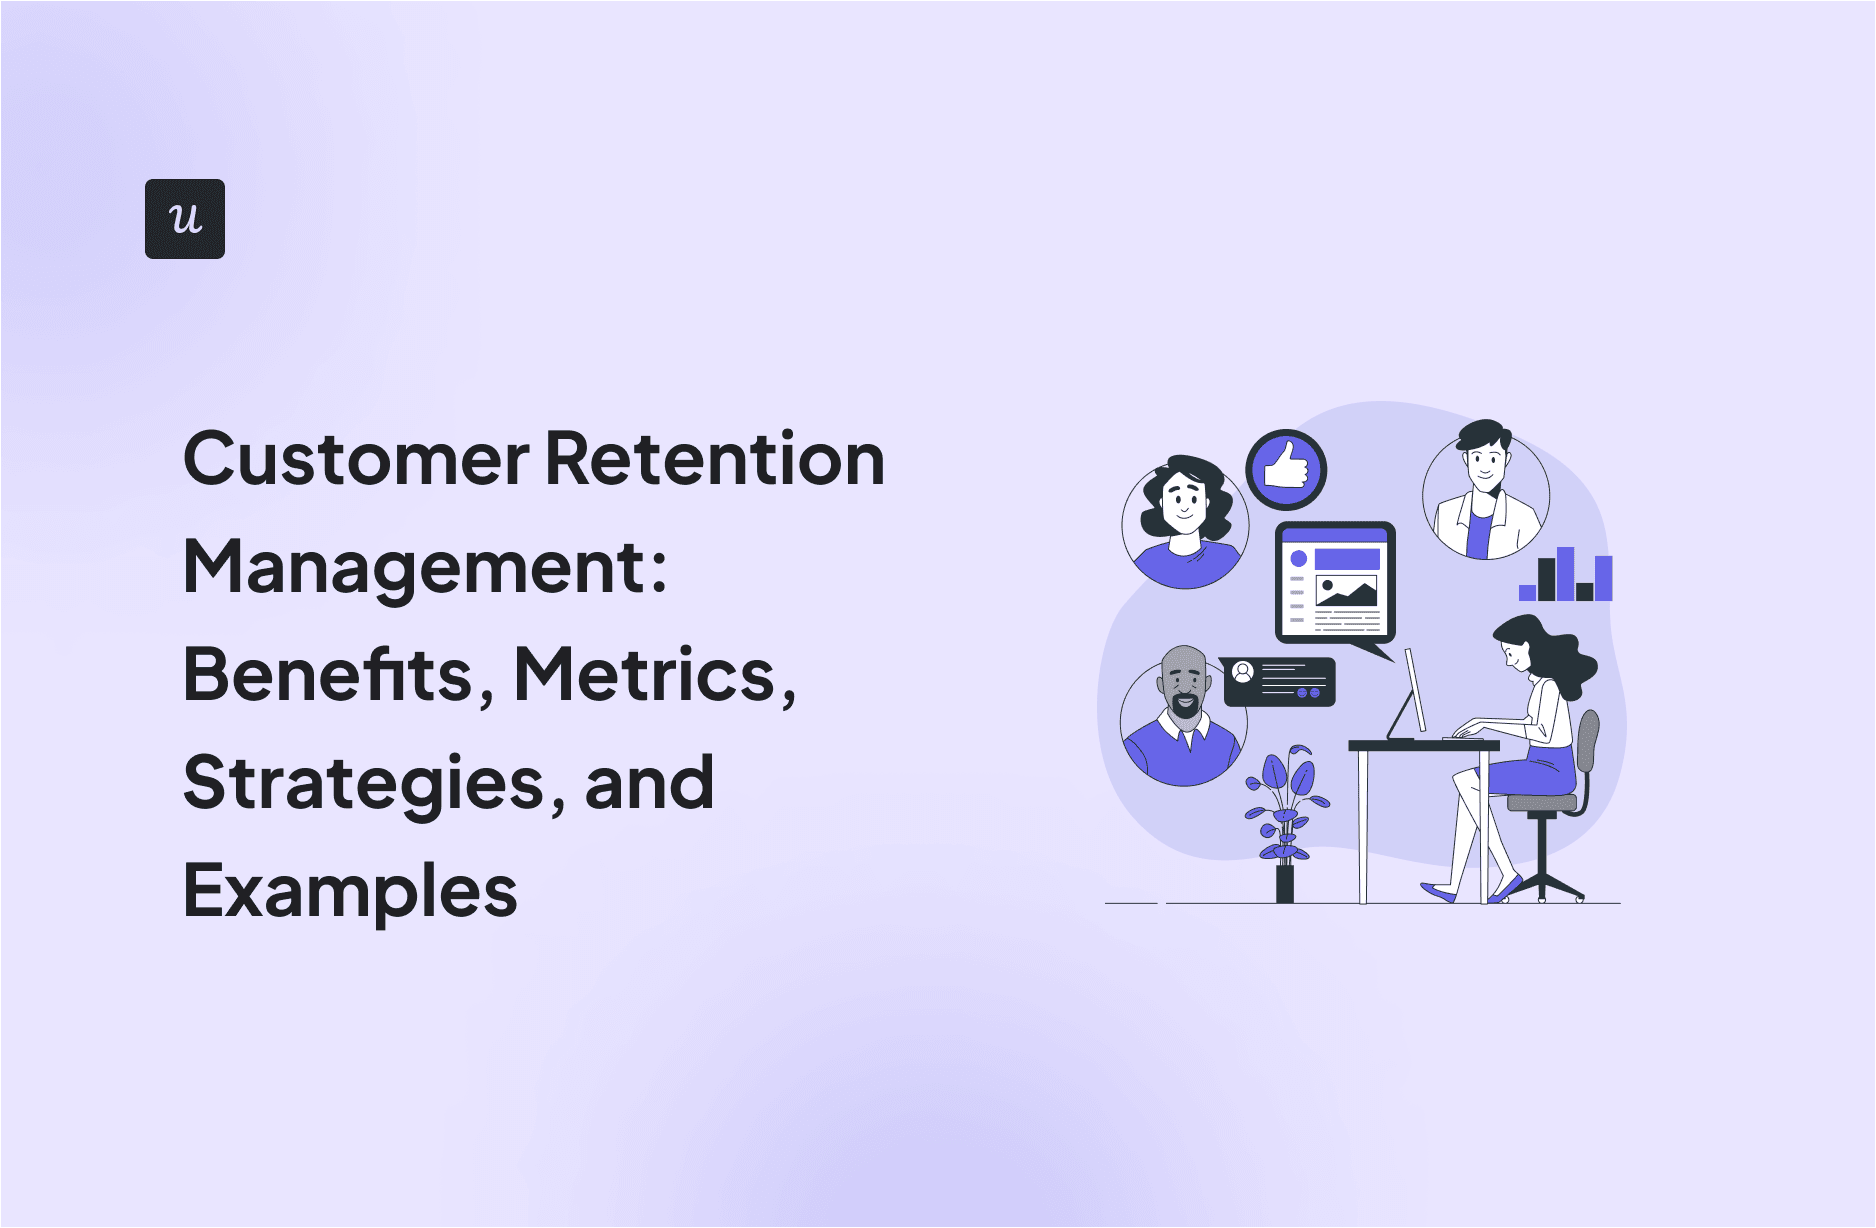 Customer Retention Management: Benefits, Metrics, Strategies, and Examples cover